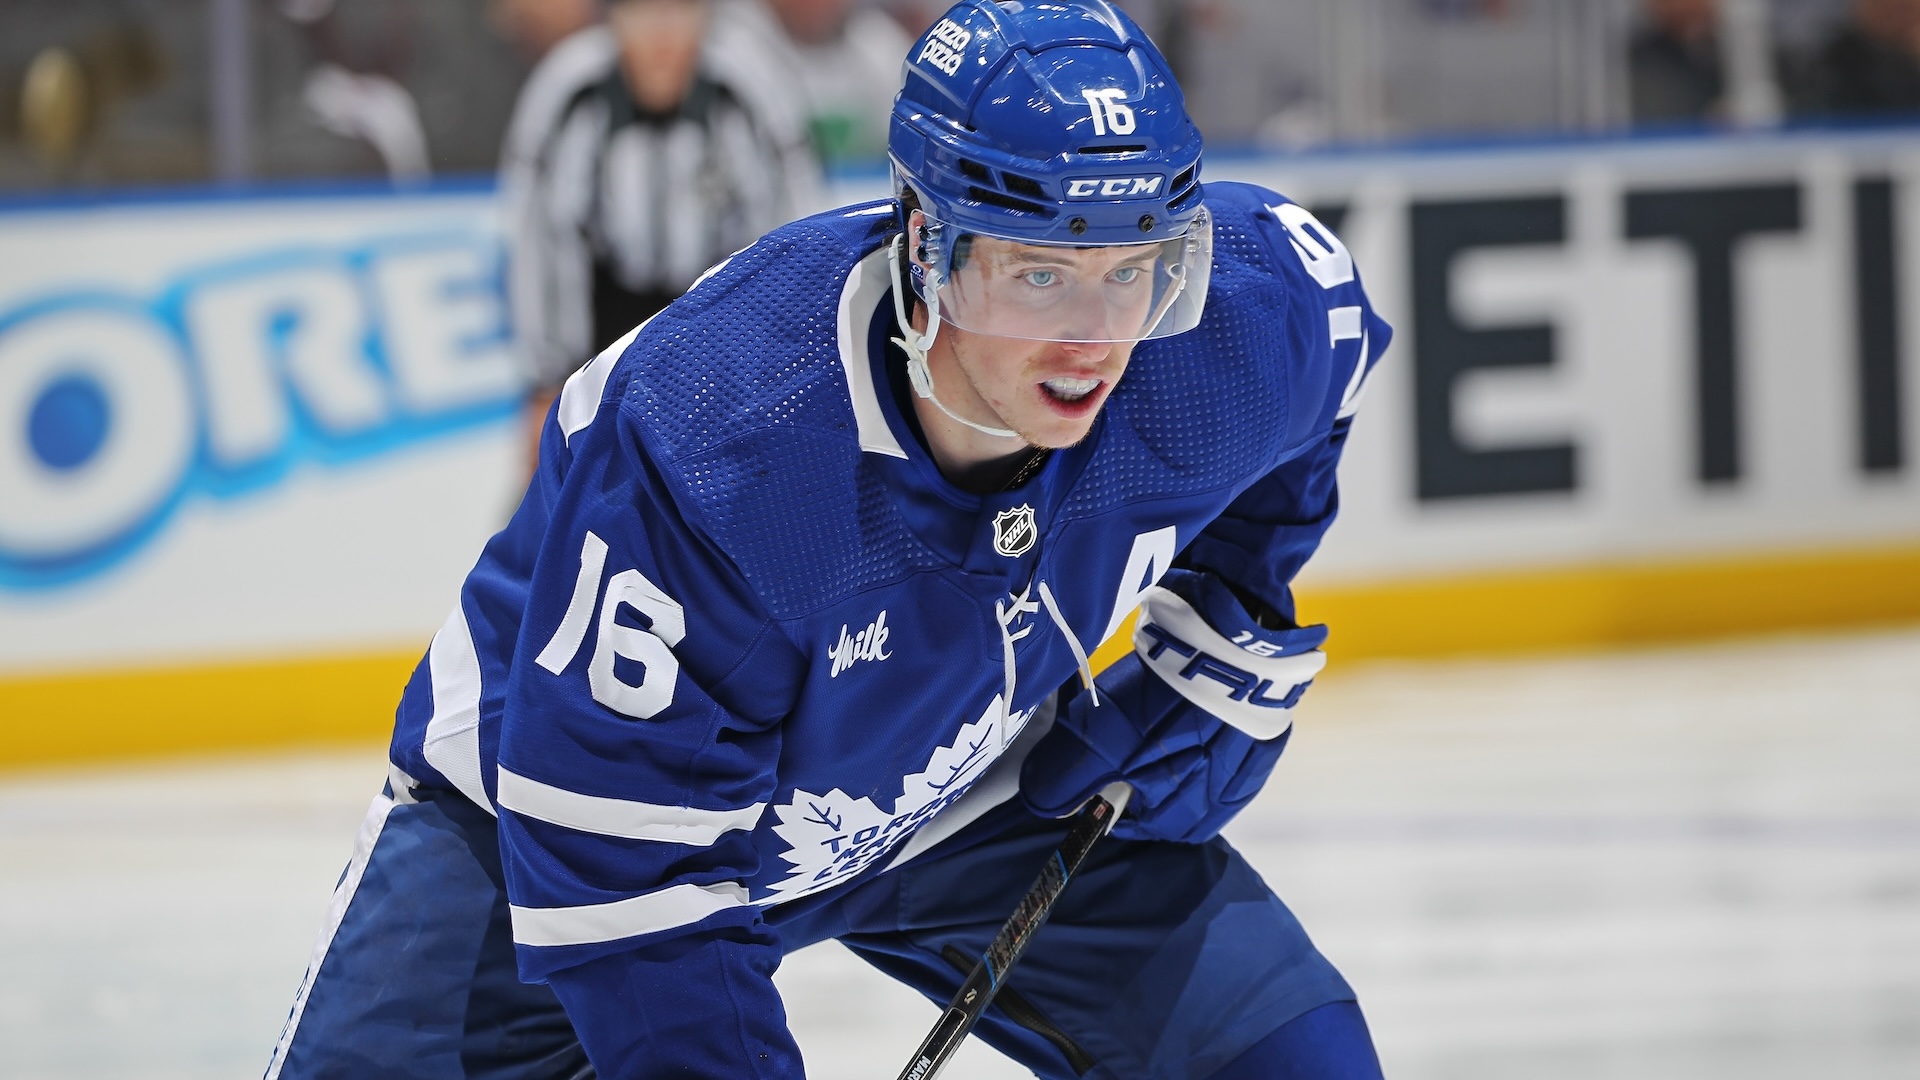 People see us as Gods”: Marner missed an opportunity to keep his mouth shut - Dose.ca